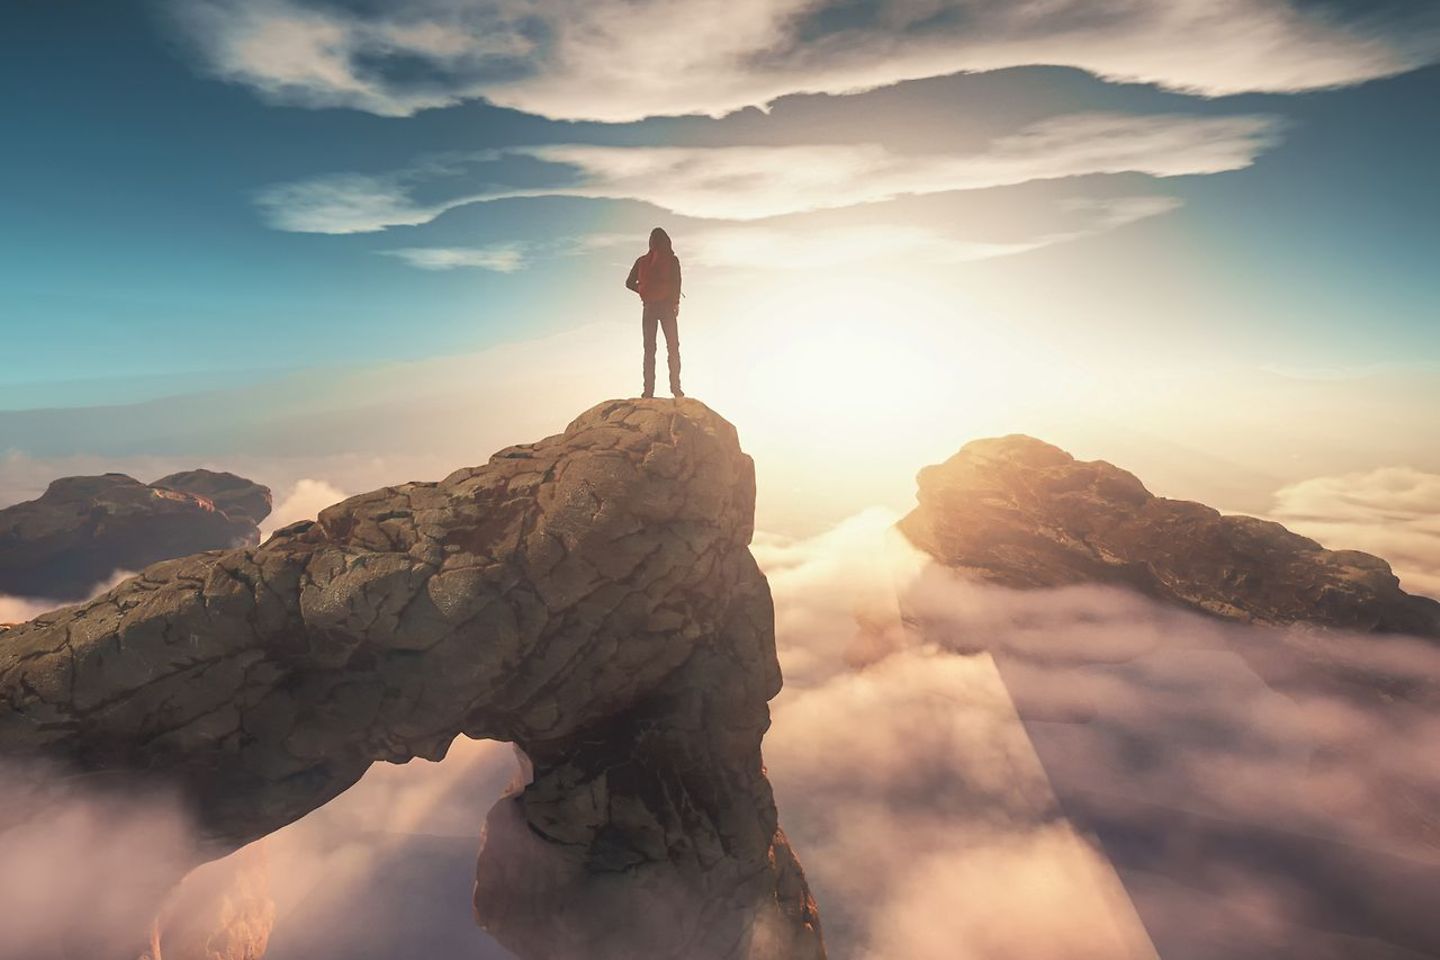 A man stands on a mountain top above the cloud cover